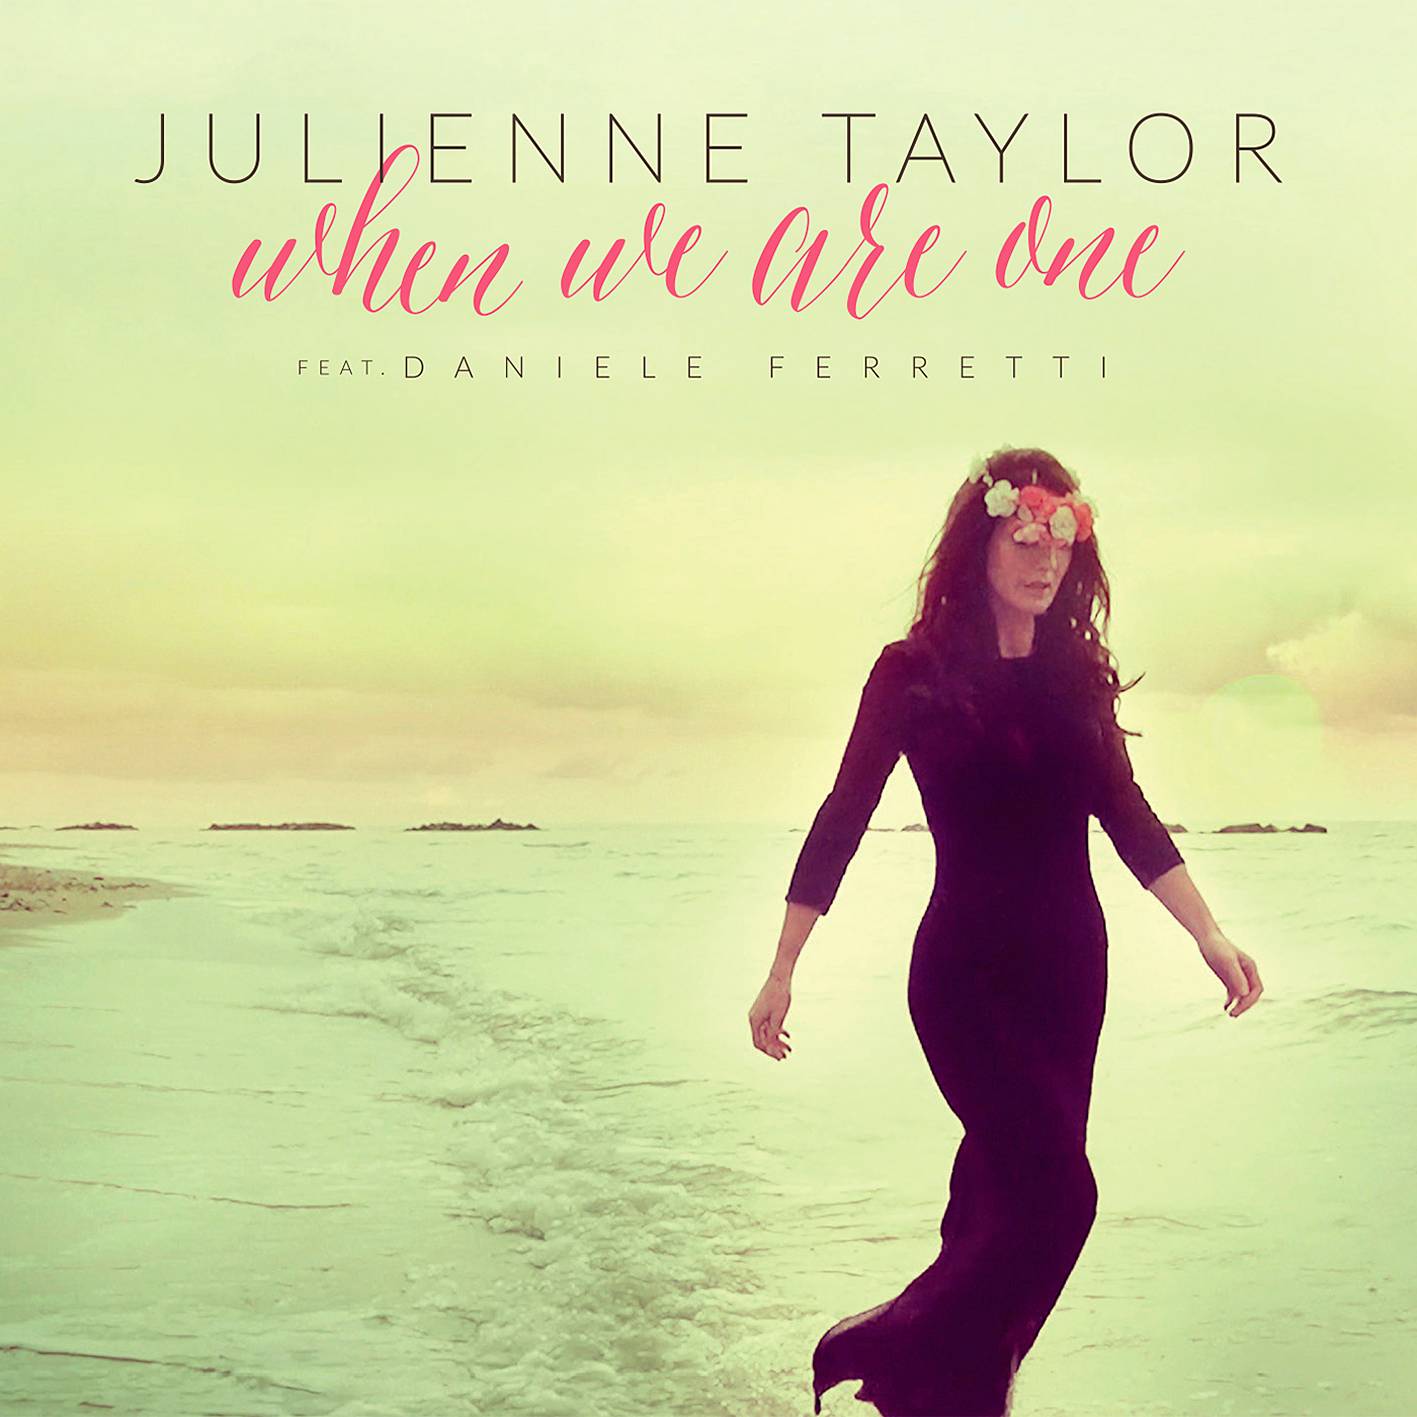 Julienne Taylor - When We Are One (2016) SACD ISO + FLAC 24bit/88,2kHz